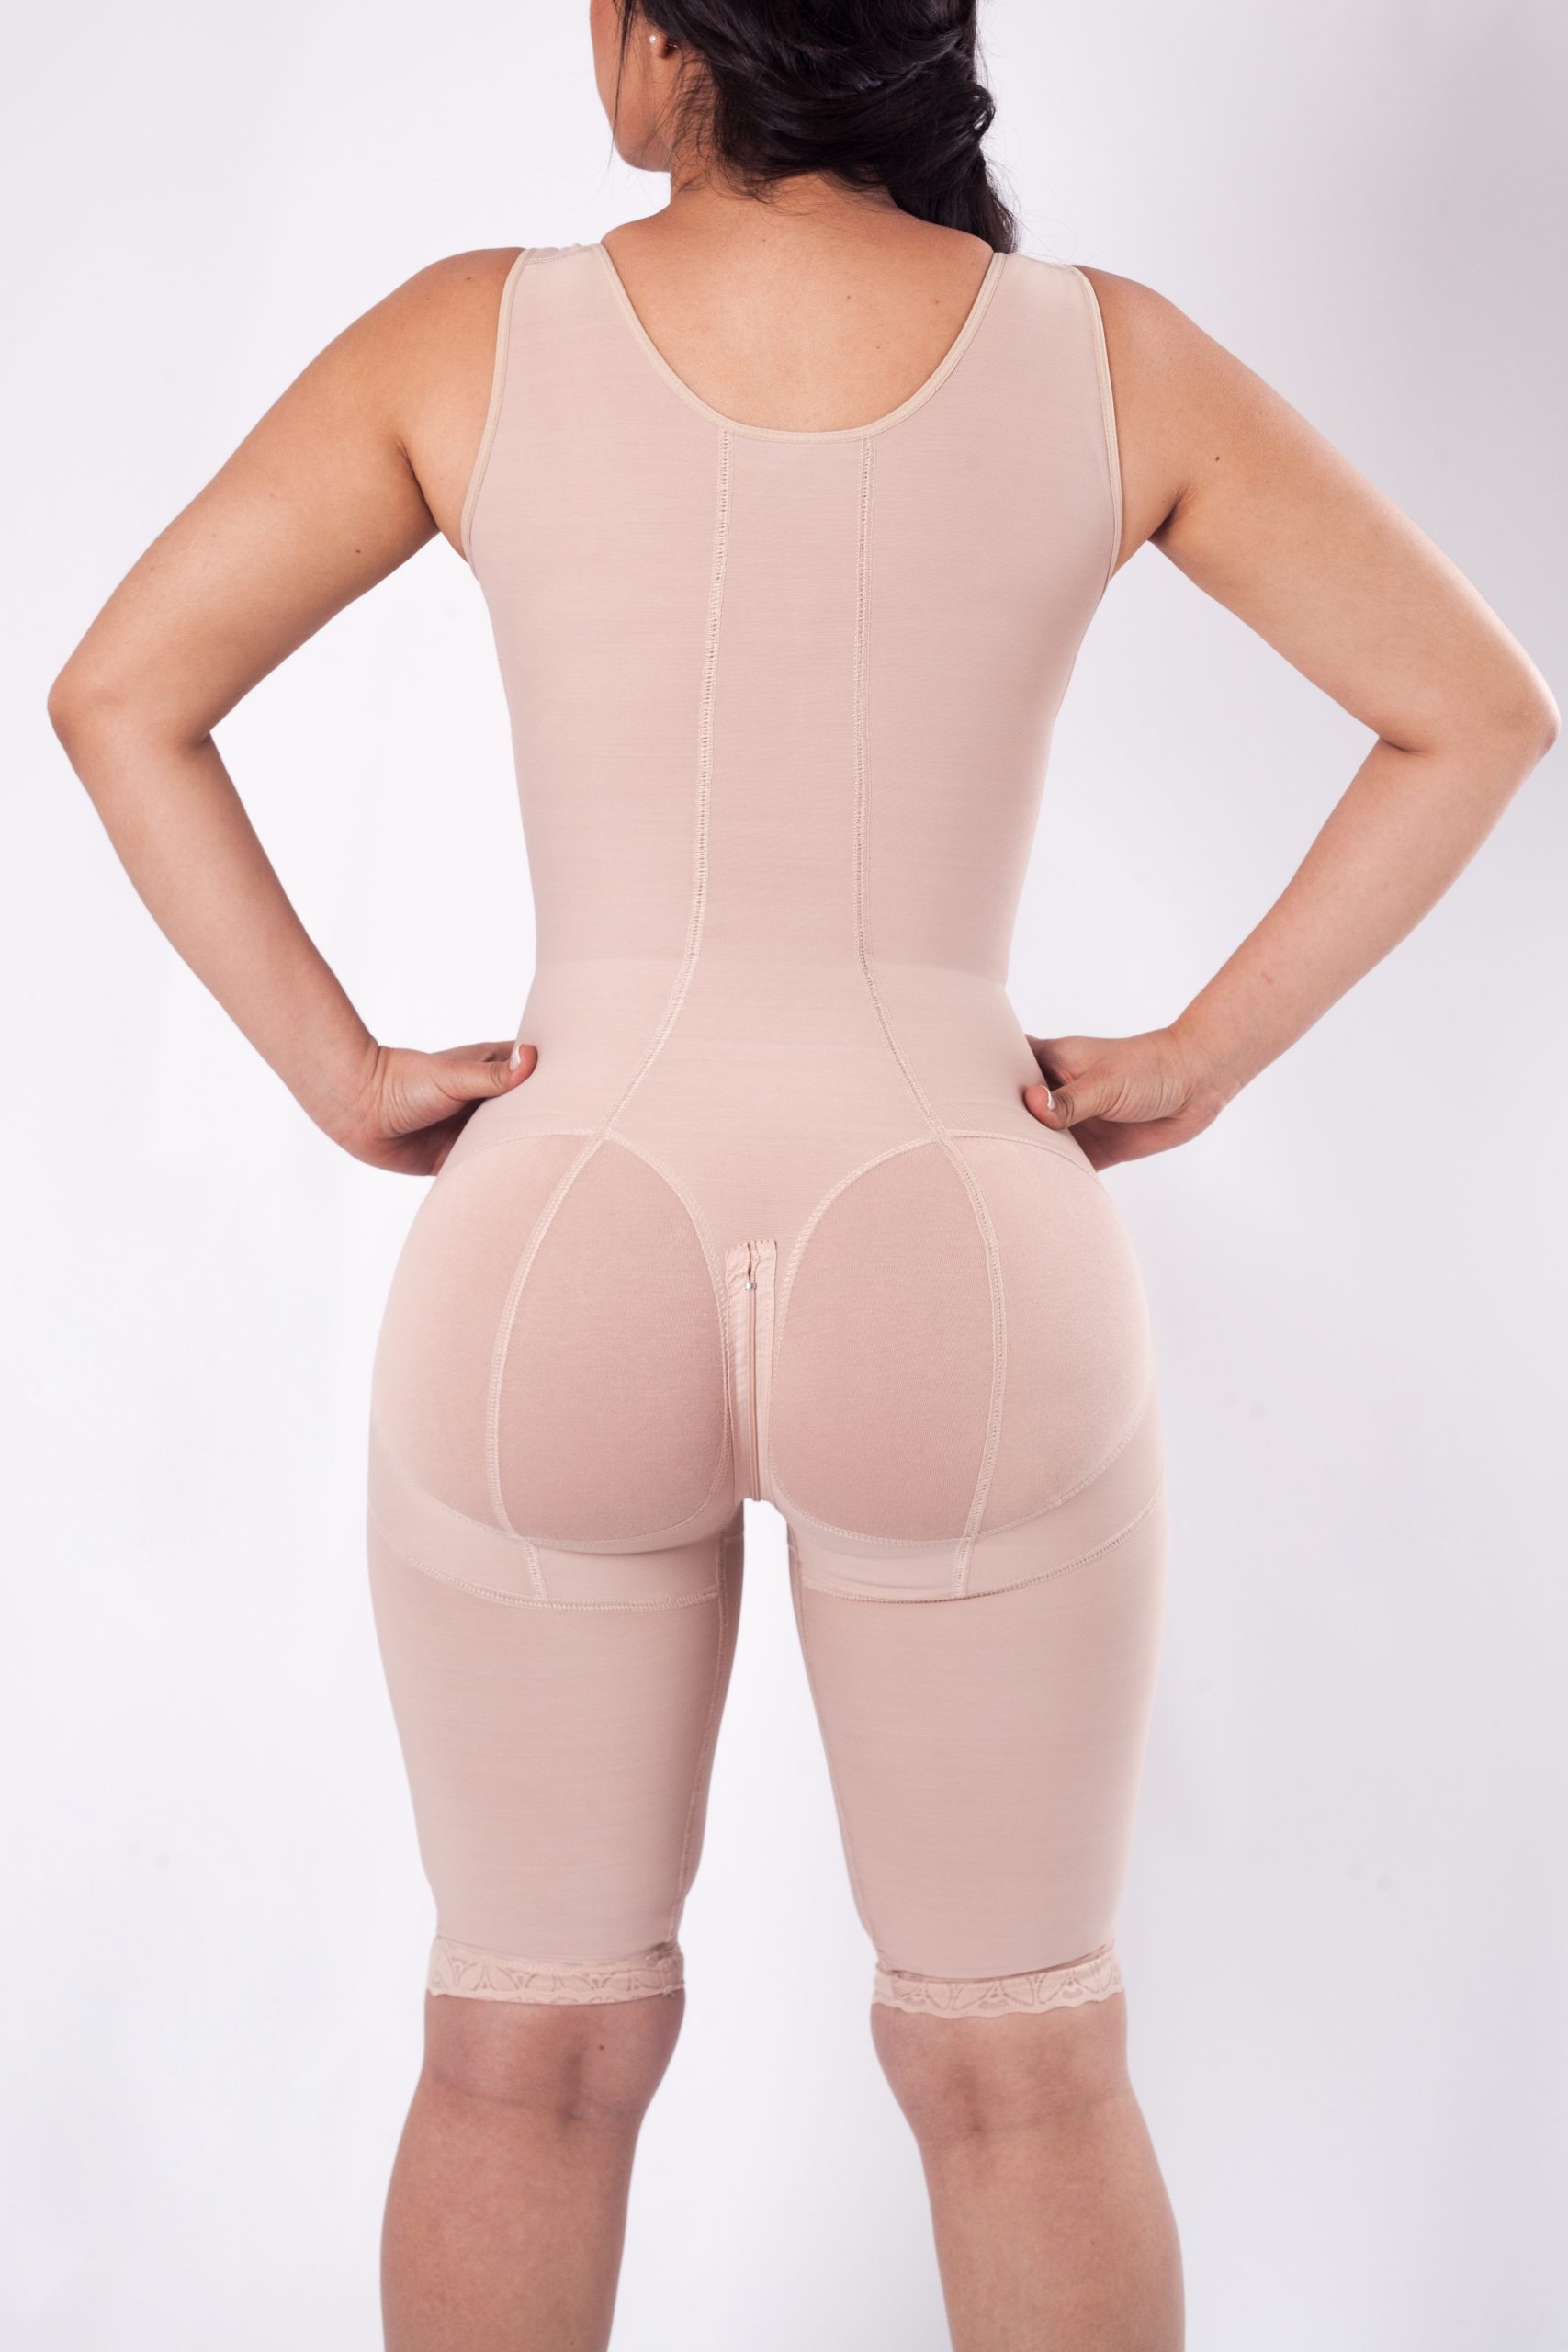 Full body above knee faja with sleeves - Contour Fajas